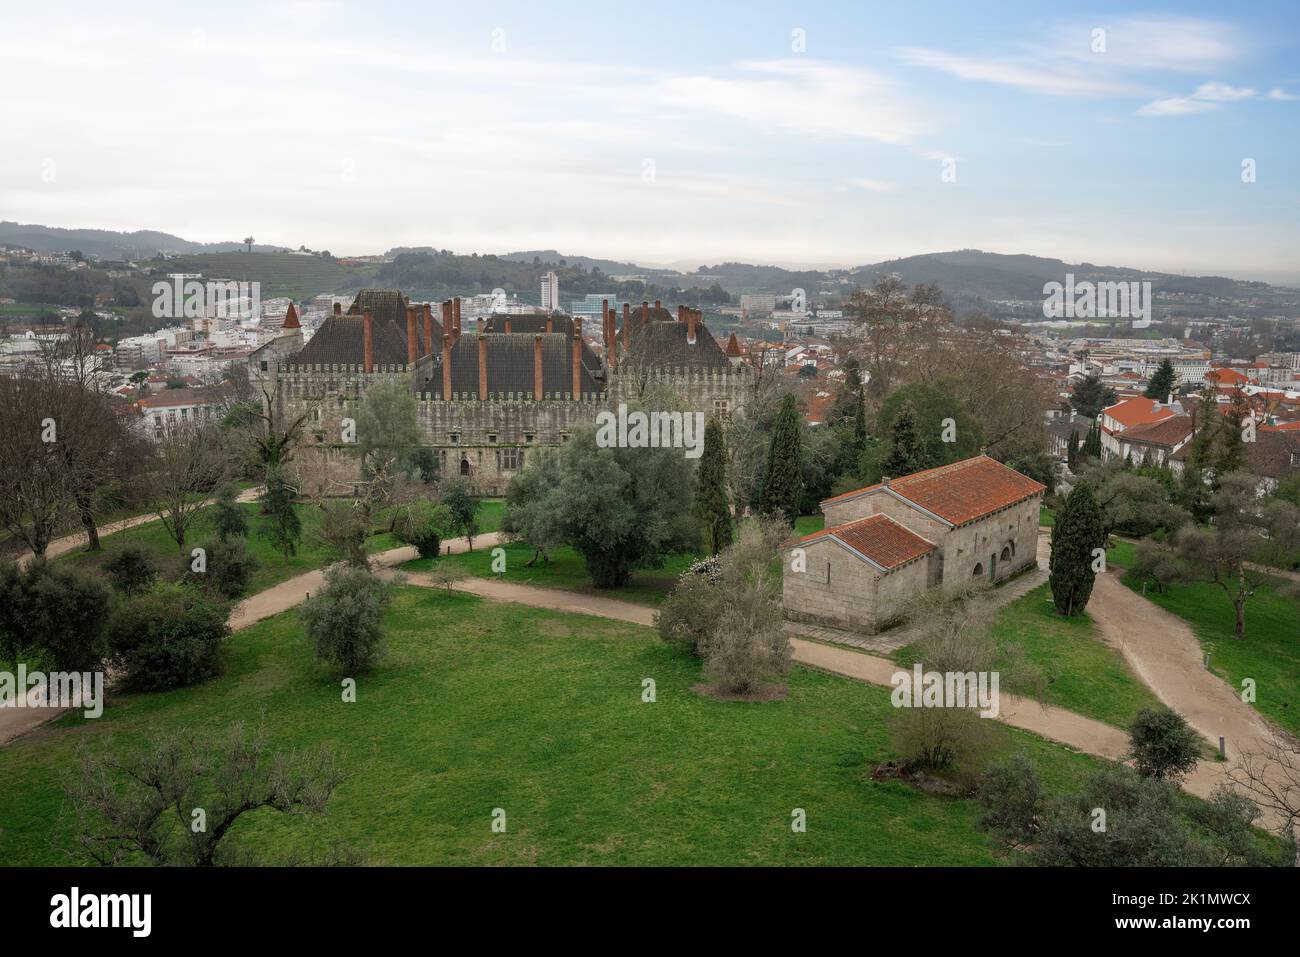 Aerial view of Sacred Hill with Palace of the Dukes of Braganza and Church of Sao Miguel do Castelo - Guimaraes, Portugal Stock Photo